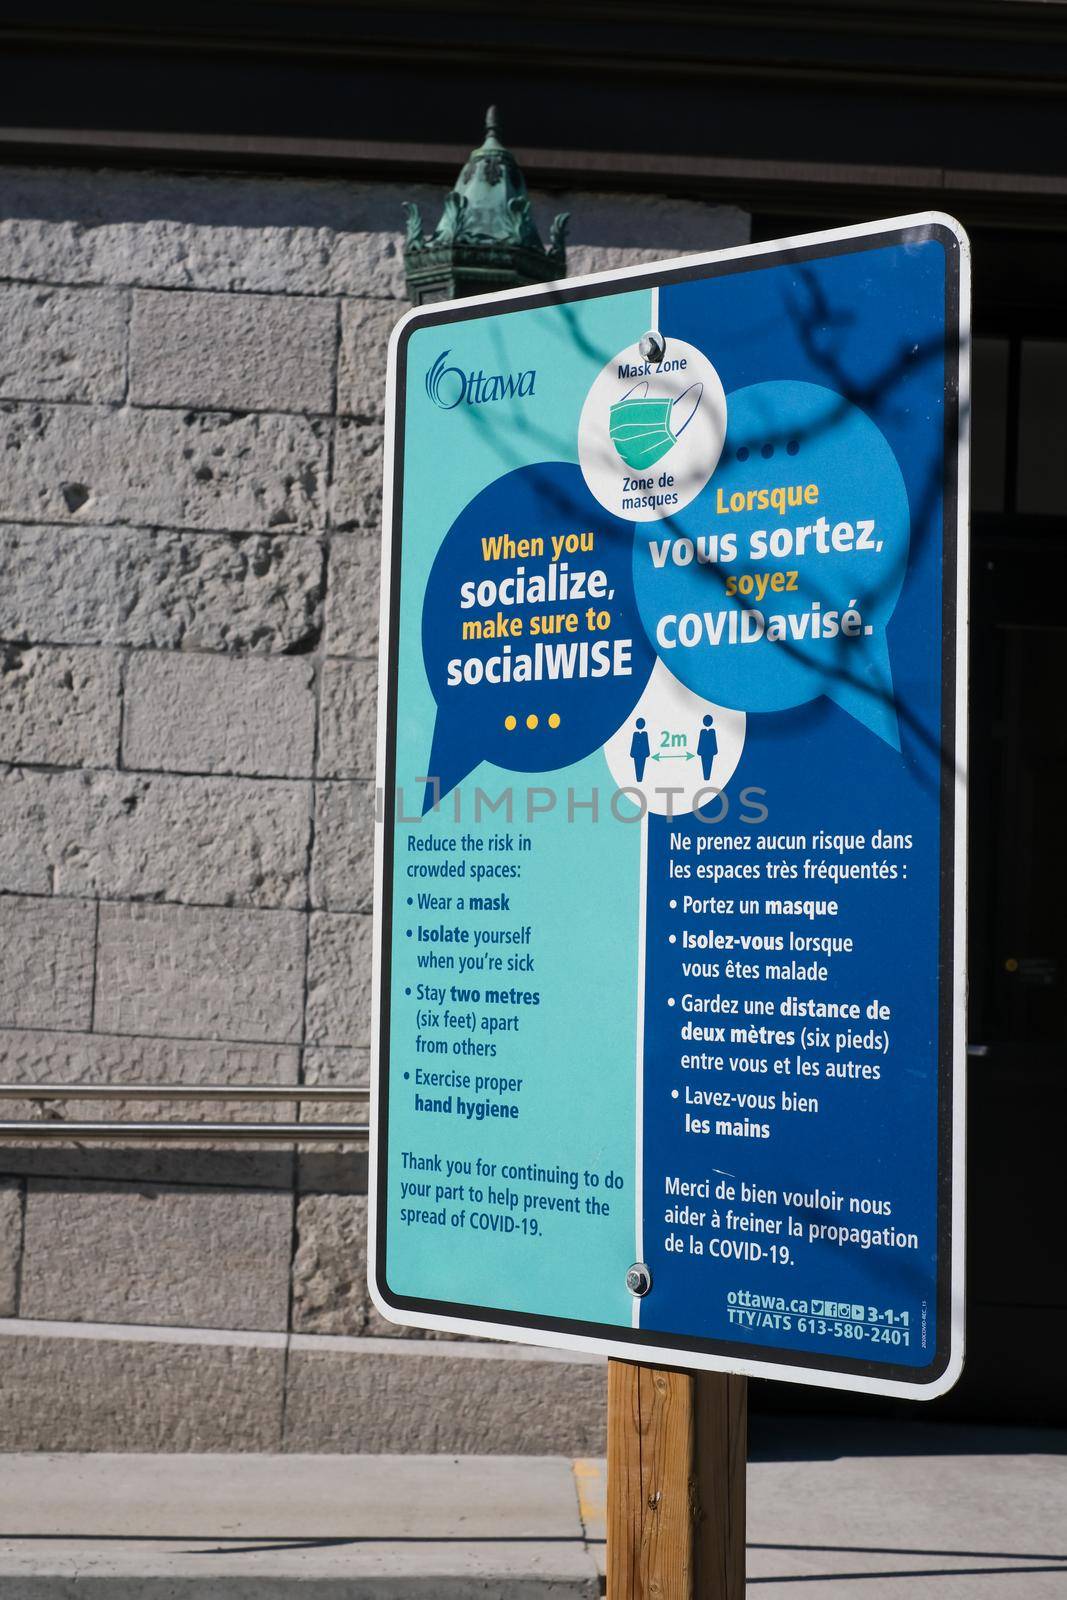 Ottawa, Ontario, Canada - March 15, 2021: A sign posted by the City of Ottawa in the ByWard Market promotes public health precautions during the COVID-19 pandemic.